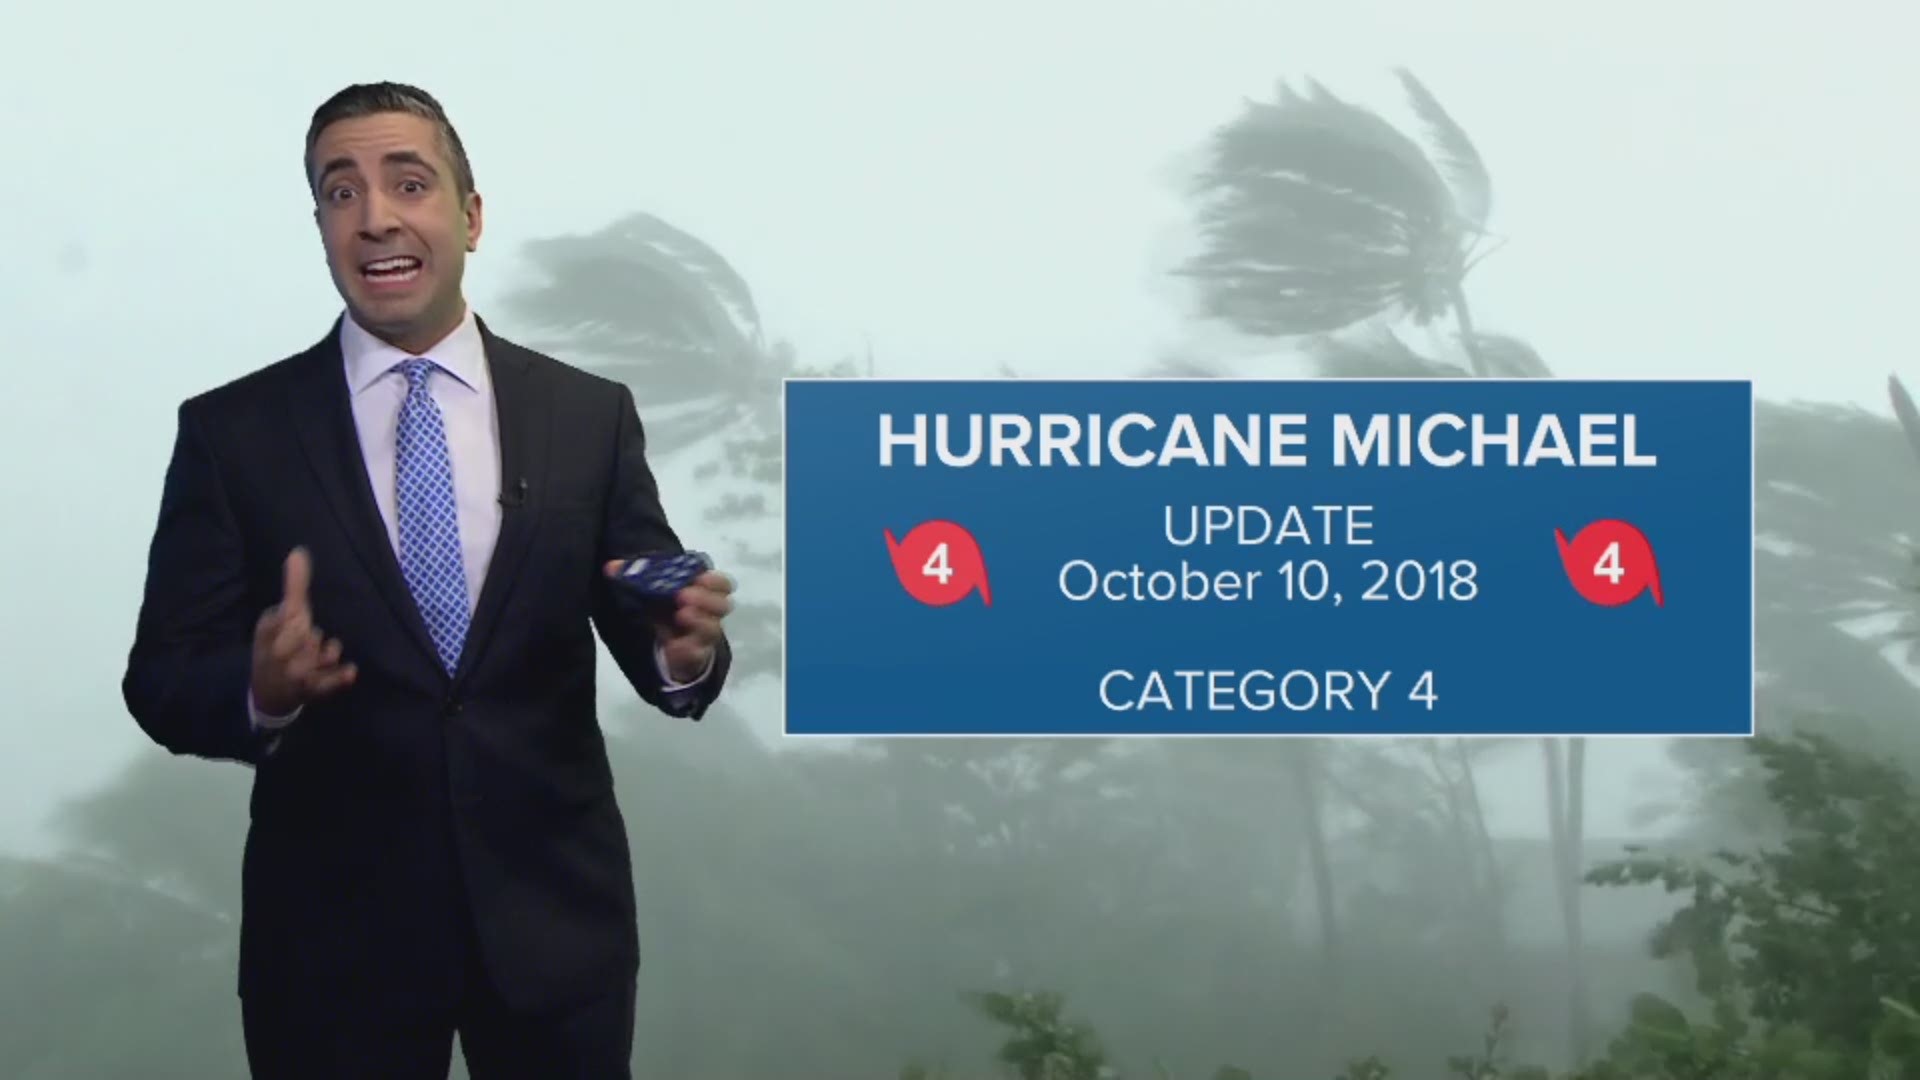 13News Now meteorologist Tim Pandajis on the dangerous Category 4 Hurricane Michael as it makes landfall in the Florida Panhandle, 10/10/18.